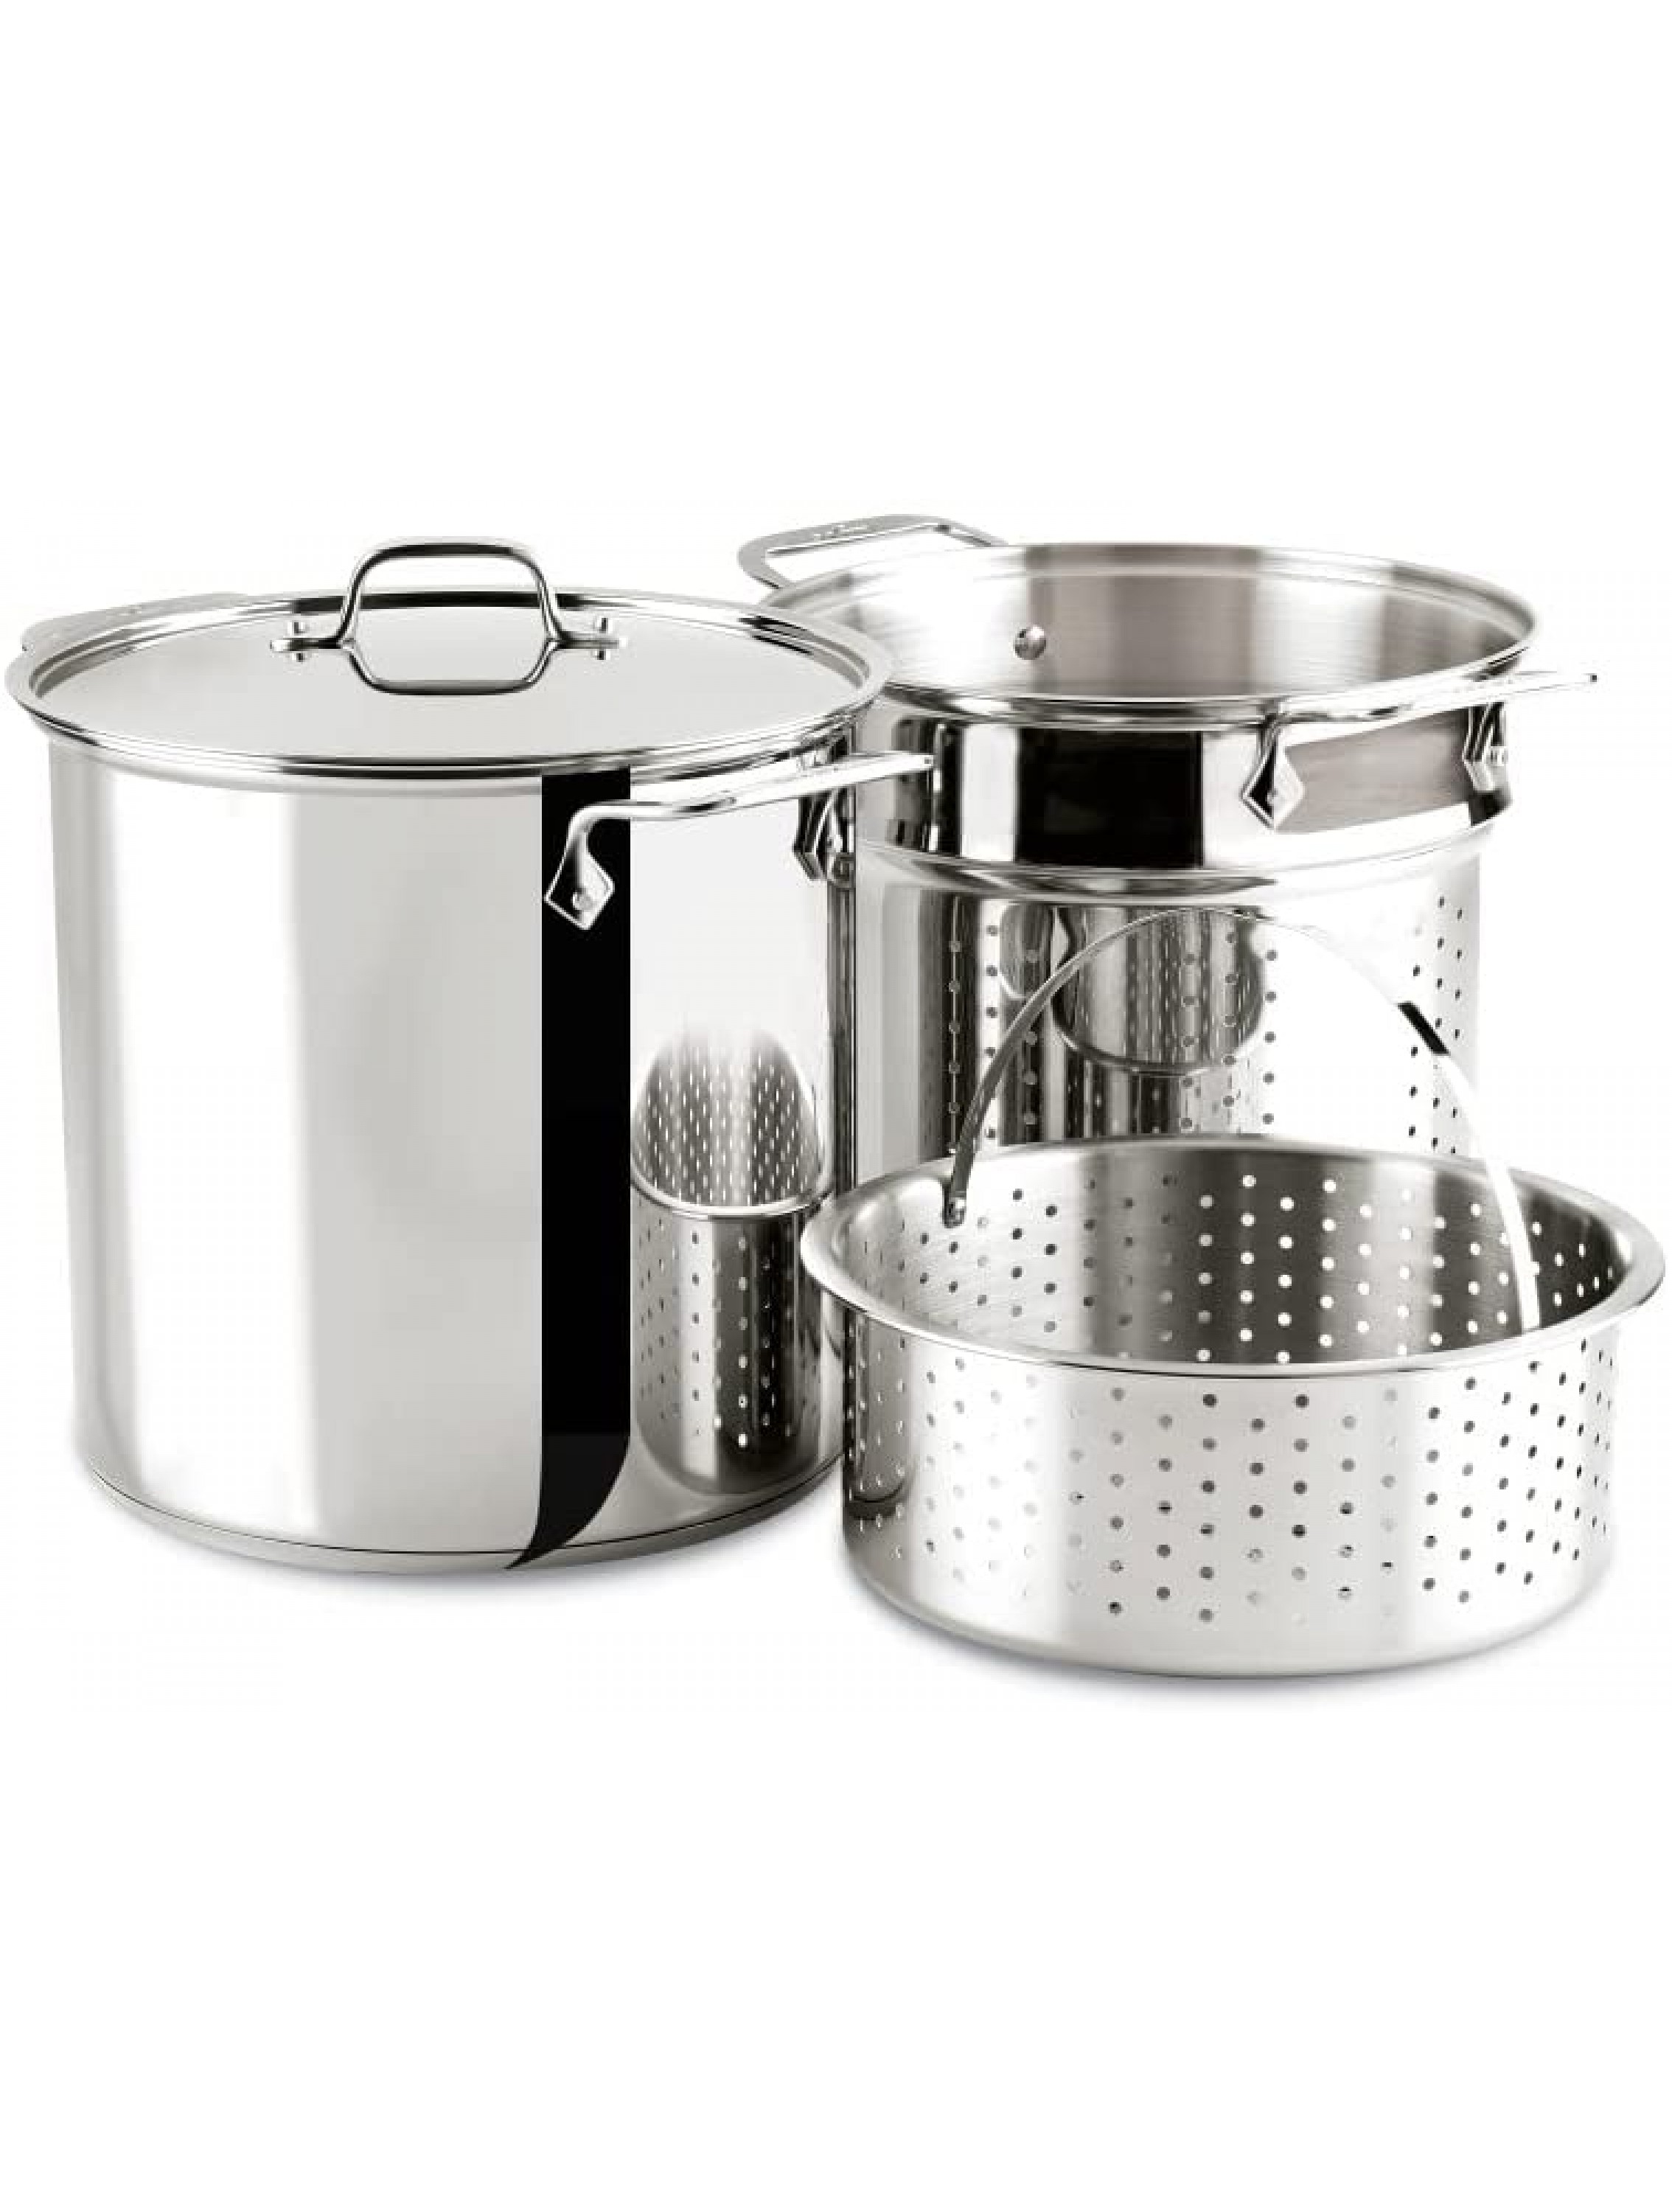 All-Clad E796S364 Specialty Stainless Steel Dishwasher Safe 12-Quart Multi Cooker Cookware Set 3-Piece with 1 lid Silver - B38LUYVOO